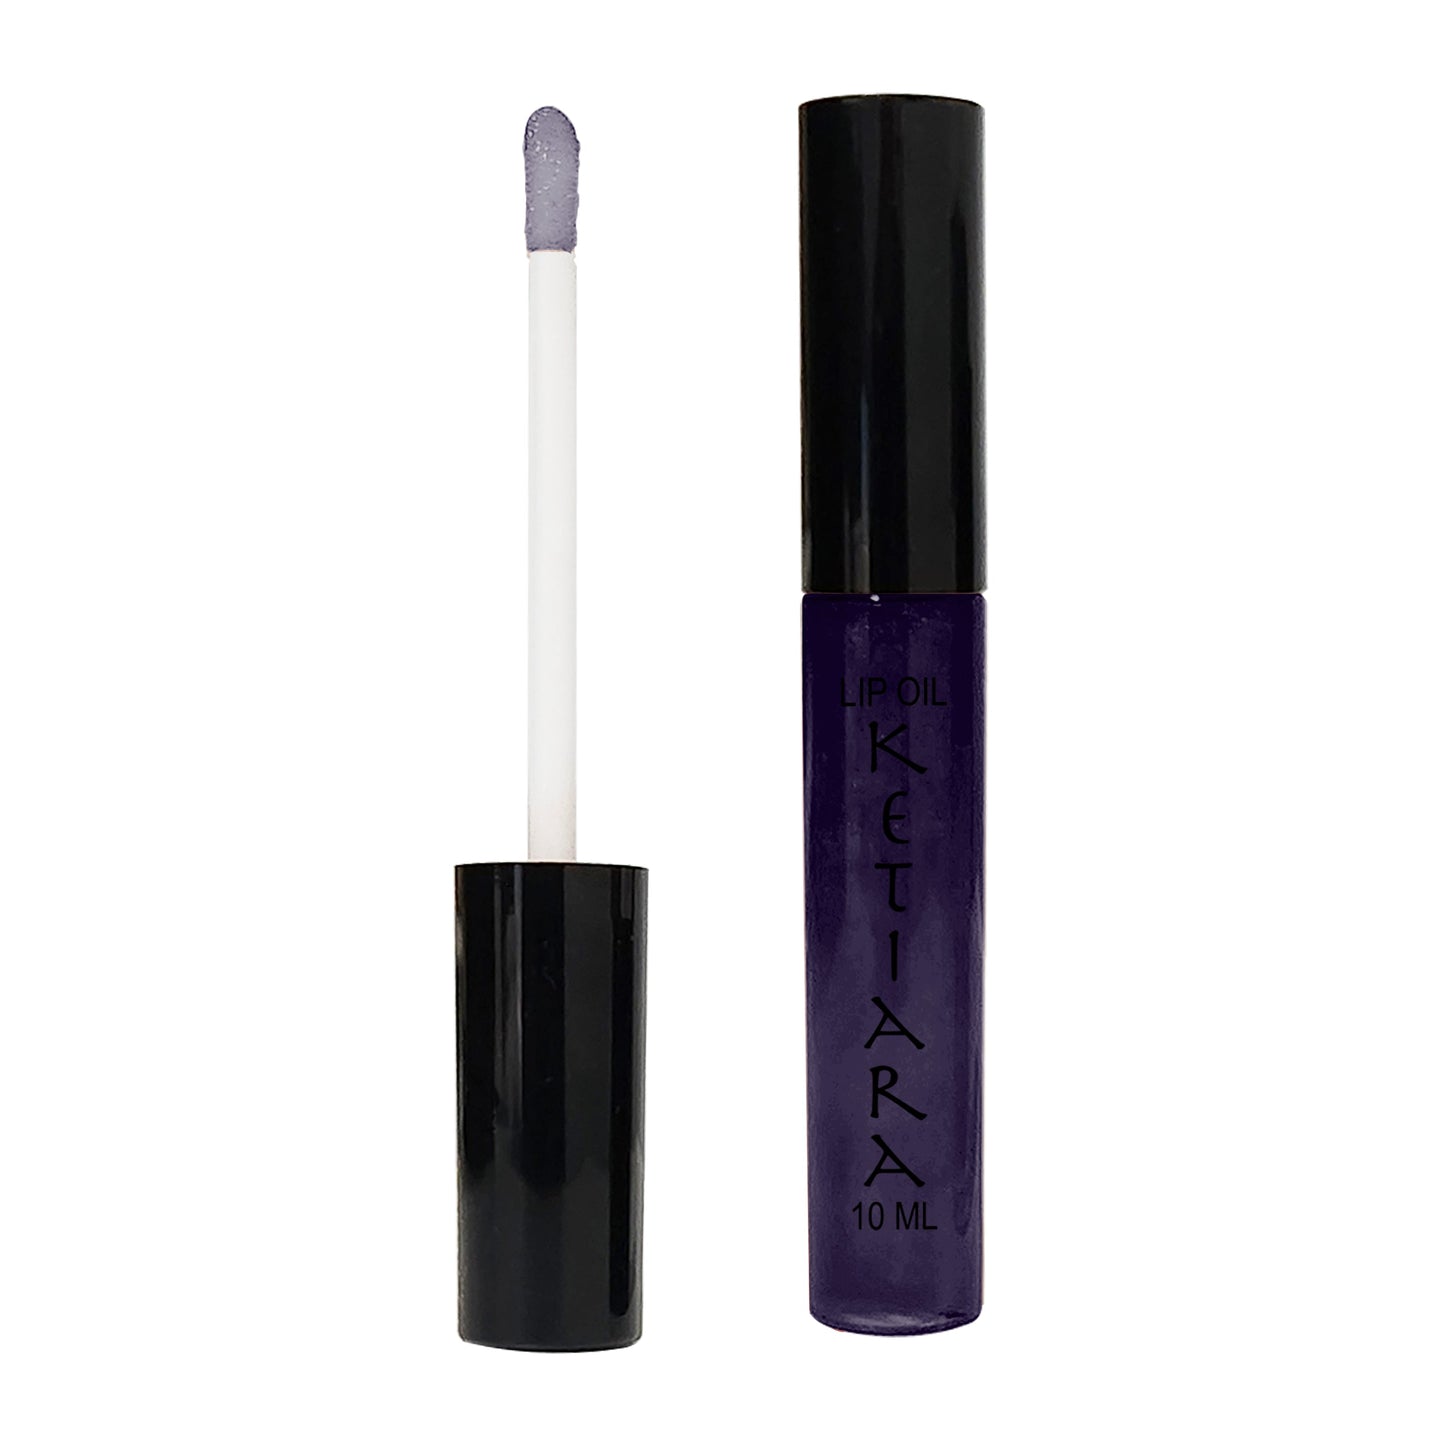 Dark Purple Hydrating And Conditioning Non-sticky Premium Sheer Lip Oil Infused With Hyaluronic Acid